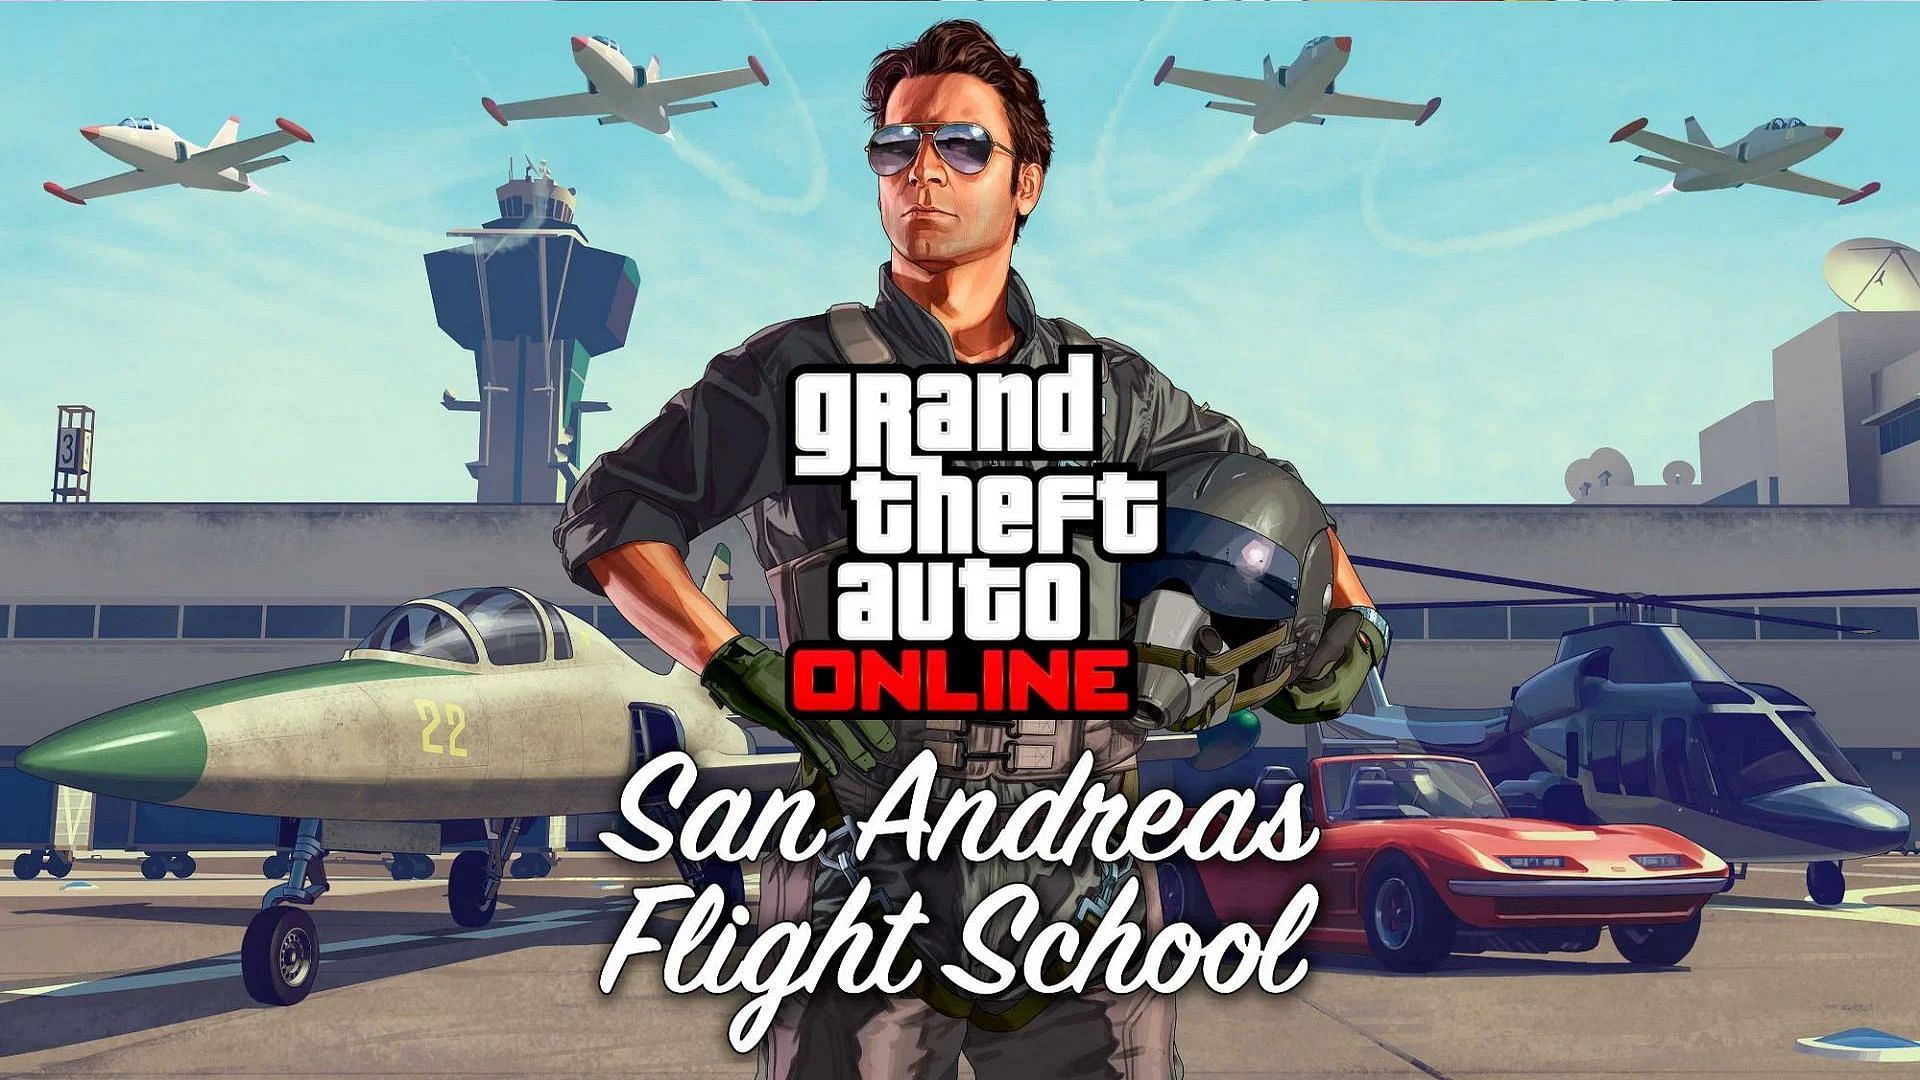 There are many mini-games in GTA Online for players to enjoy during downtime. (Image via Sportskeeda)